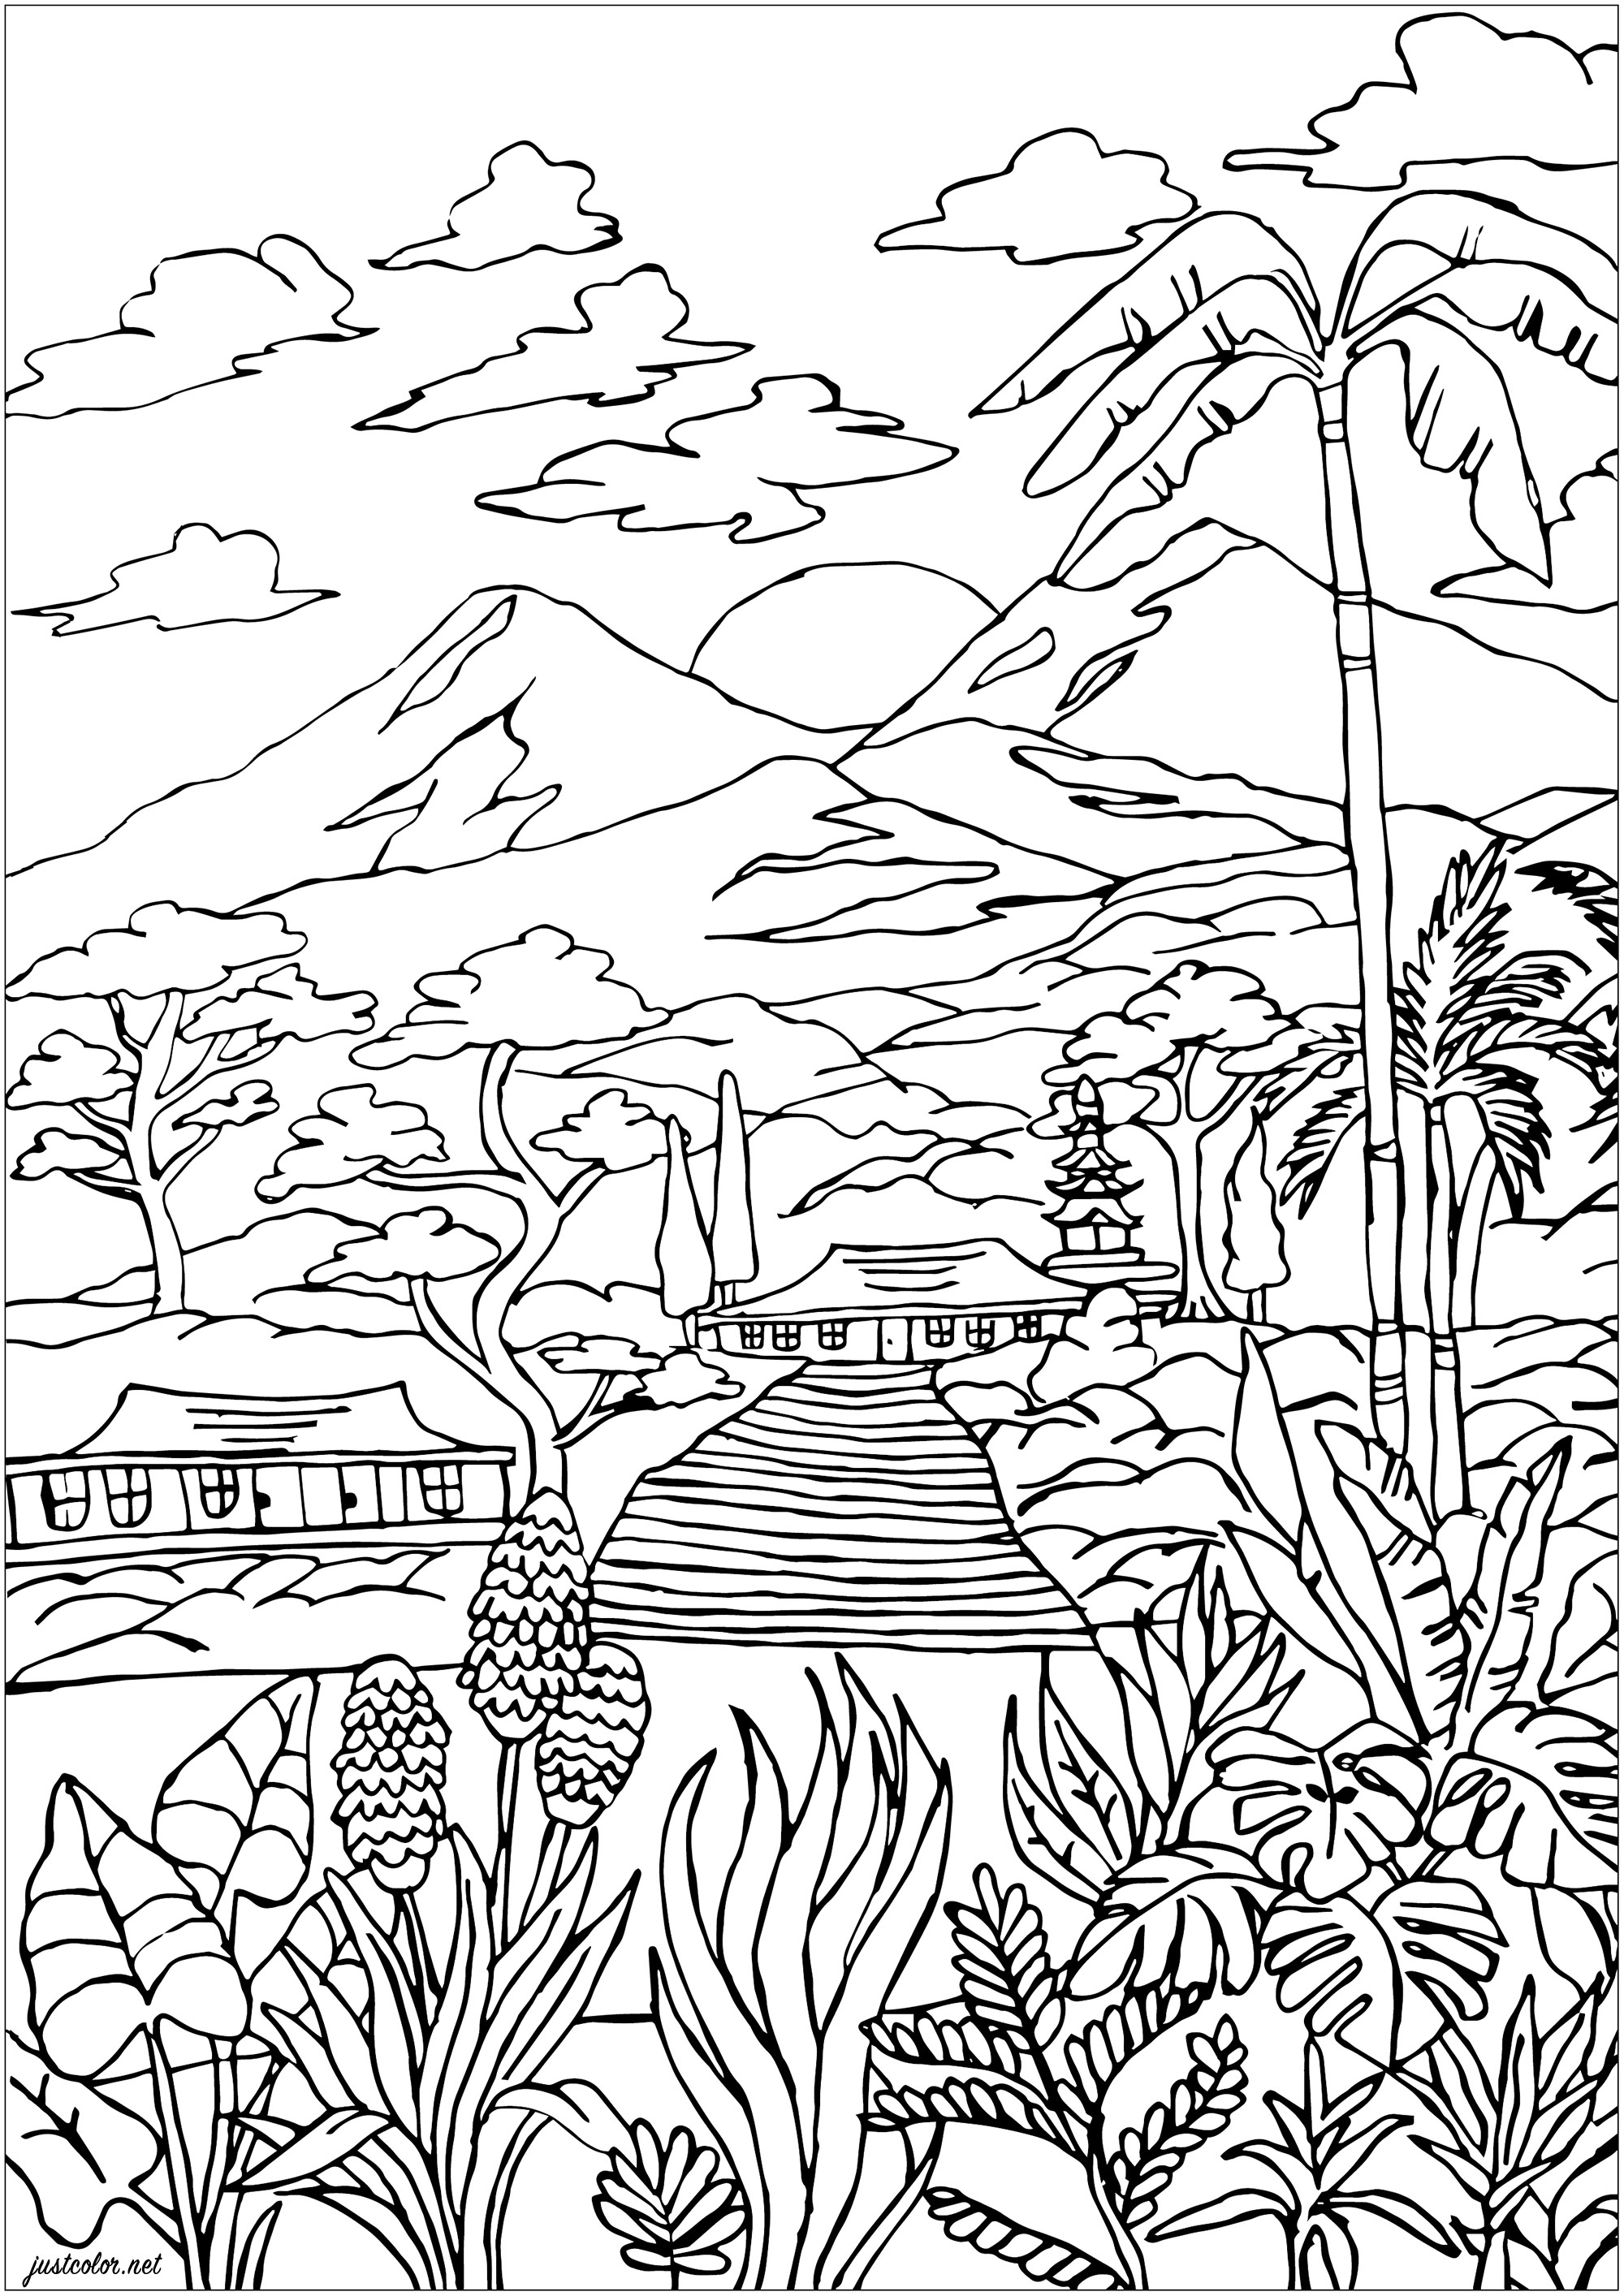 Landscape of Martinique: View of volcanoes, Creole houses, lush vegetation with palm trees and pretty plants to color. Martinique is an island in the Lesser Antilles, or Windward Islands. Its highest point is the Montagne Pelée volcano (1,397 m ). It became French in 1635, Artist : Morgan